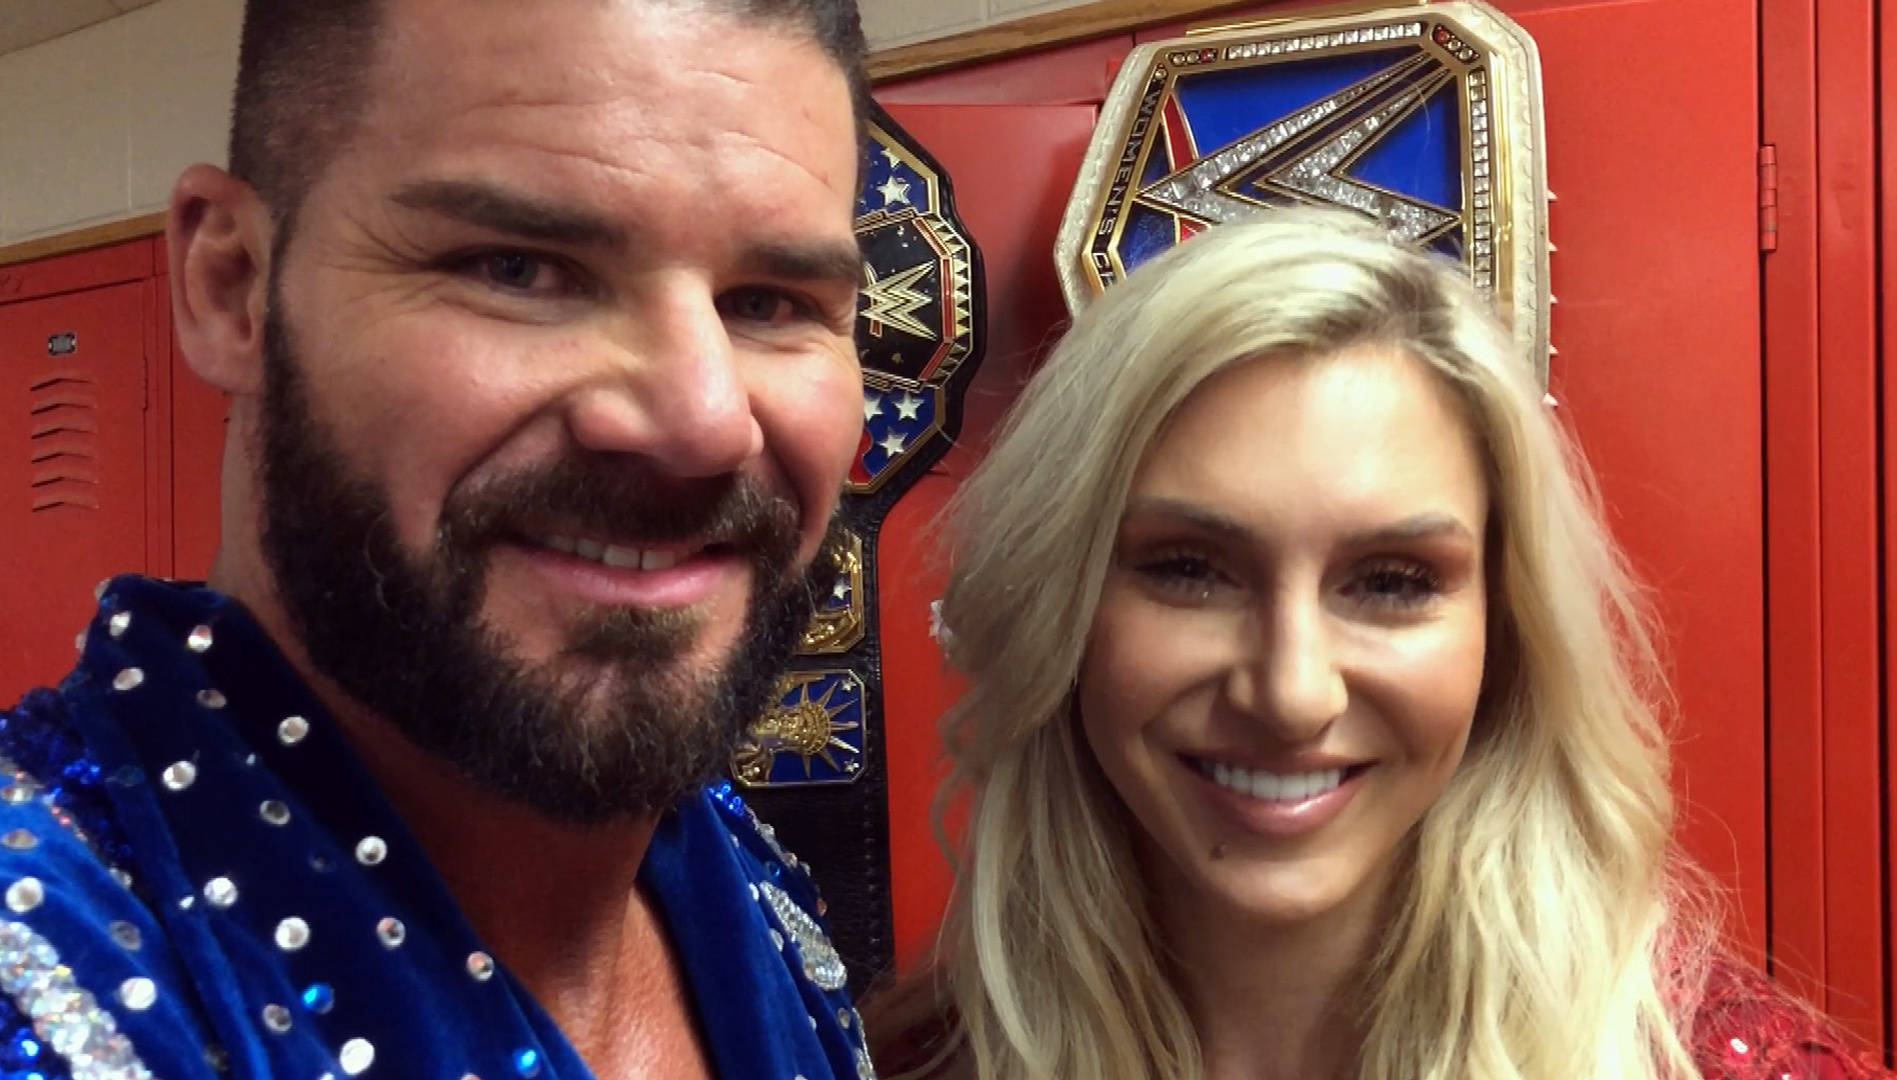 Roode & Charlotte and Rusev & Lana prepare for their second-round WWE MMC showdown